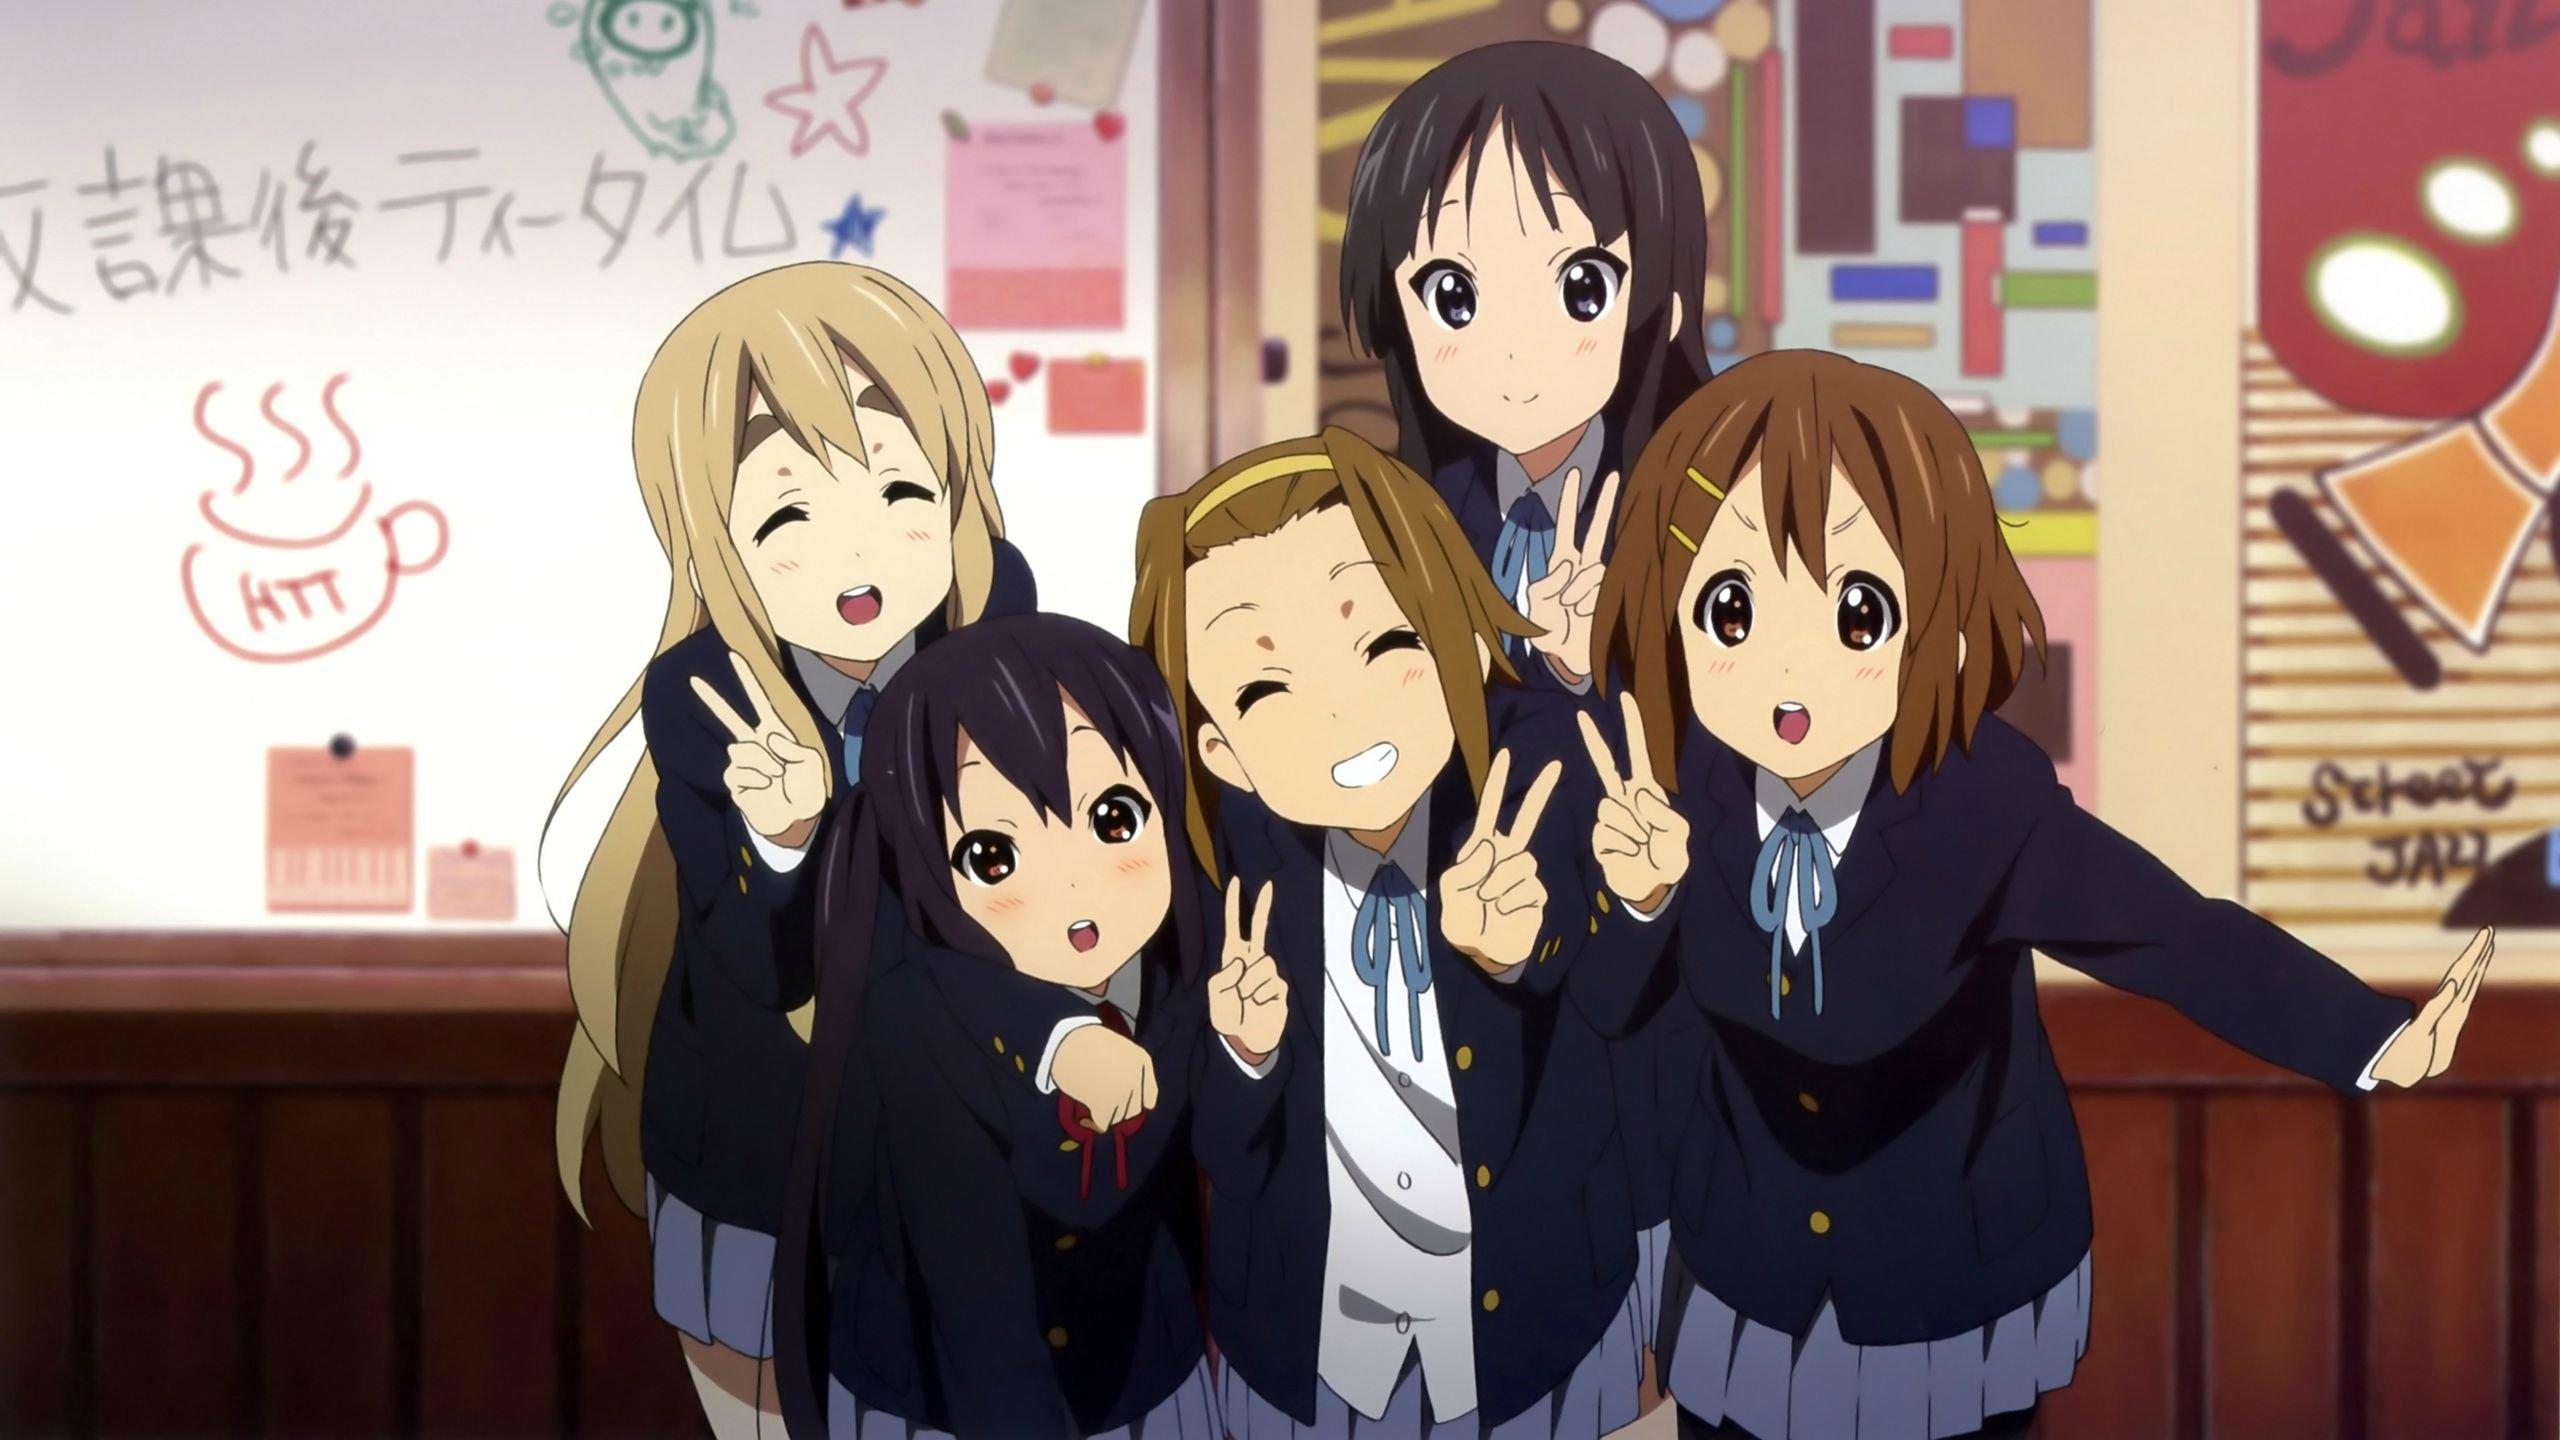 K-On! female characters wallpaper - Anime wallpapers - #49592